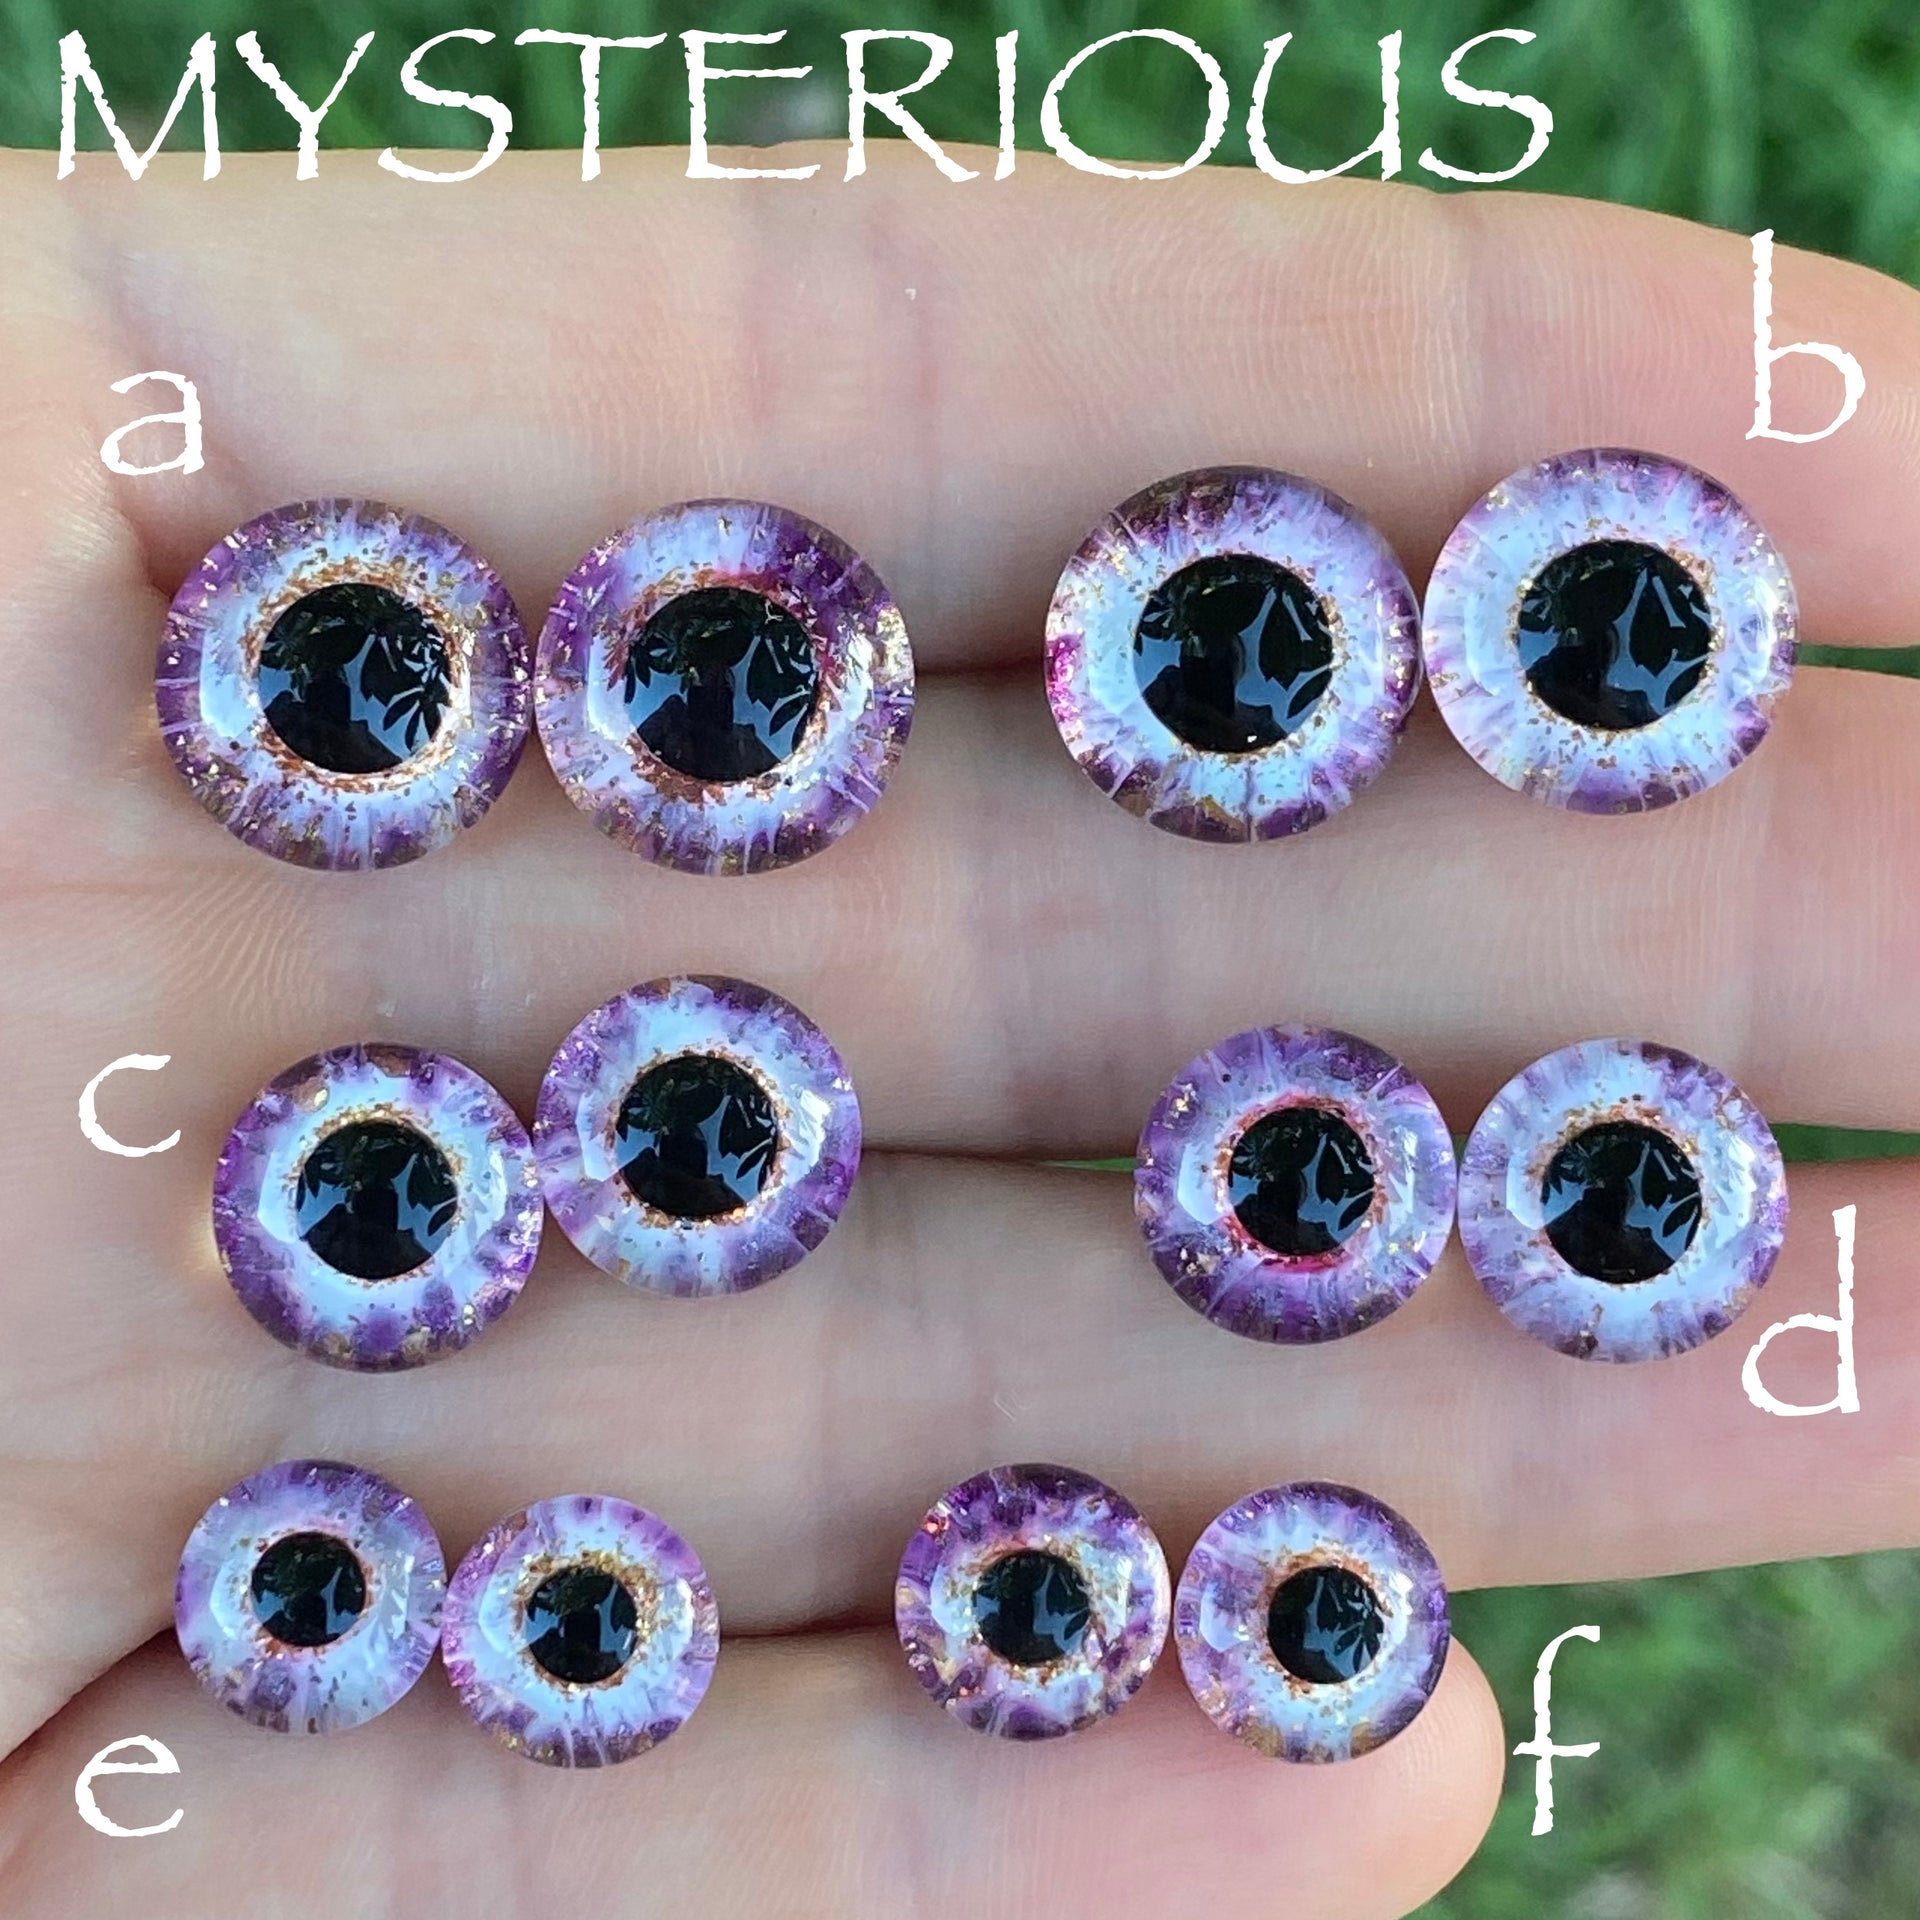 Hand Painted Eyes - Mysterious